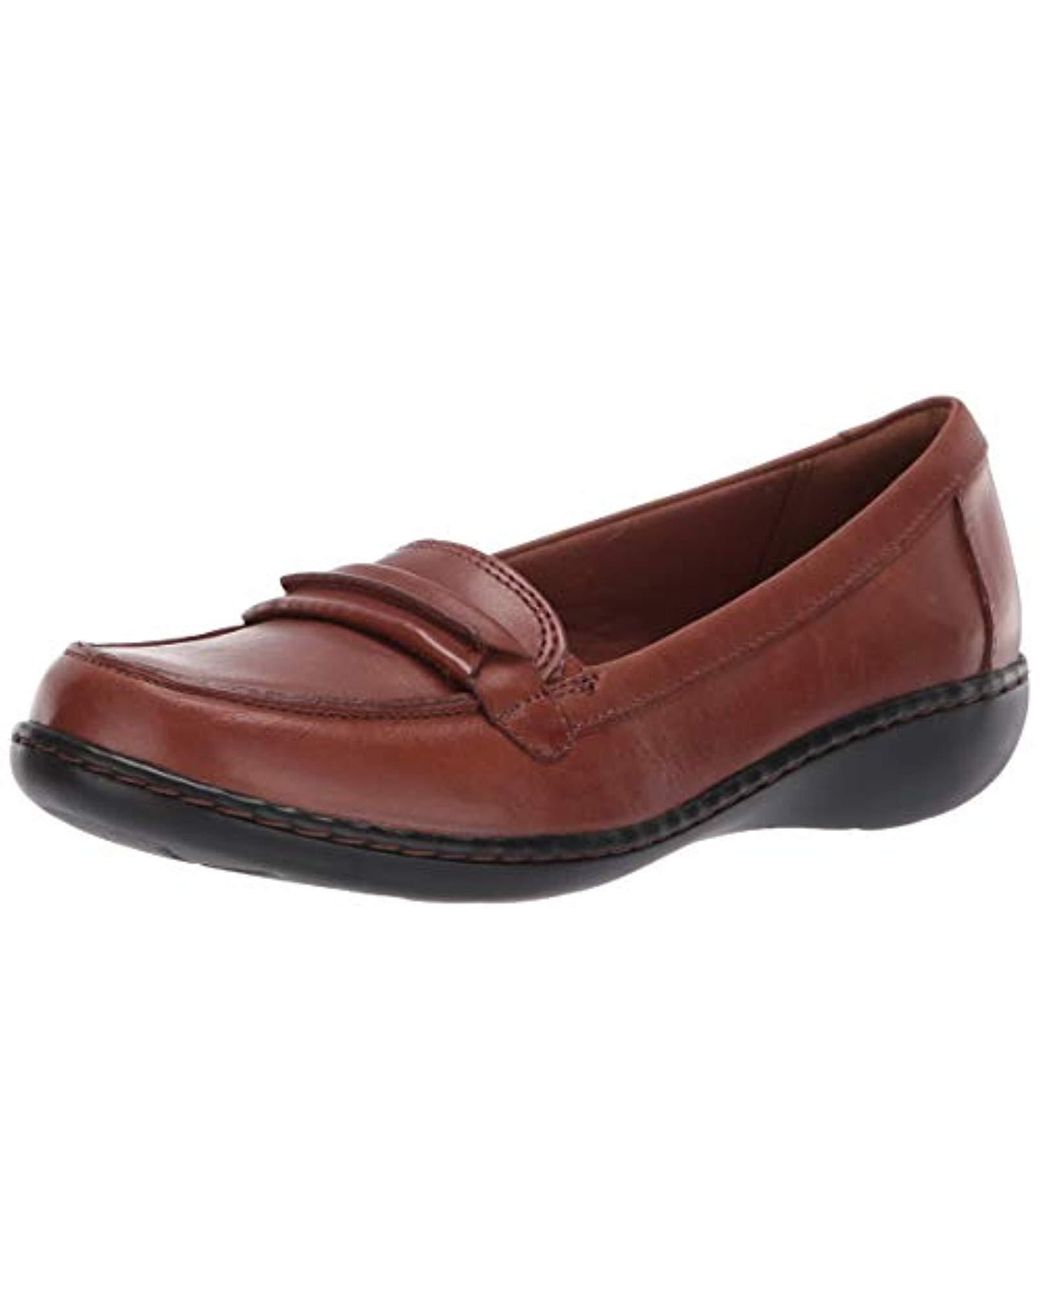 Lyst - Clarks Ashland Lily Loafer,dark Tan Leather,9 M Us in Brown